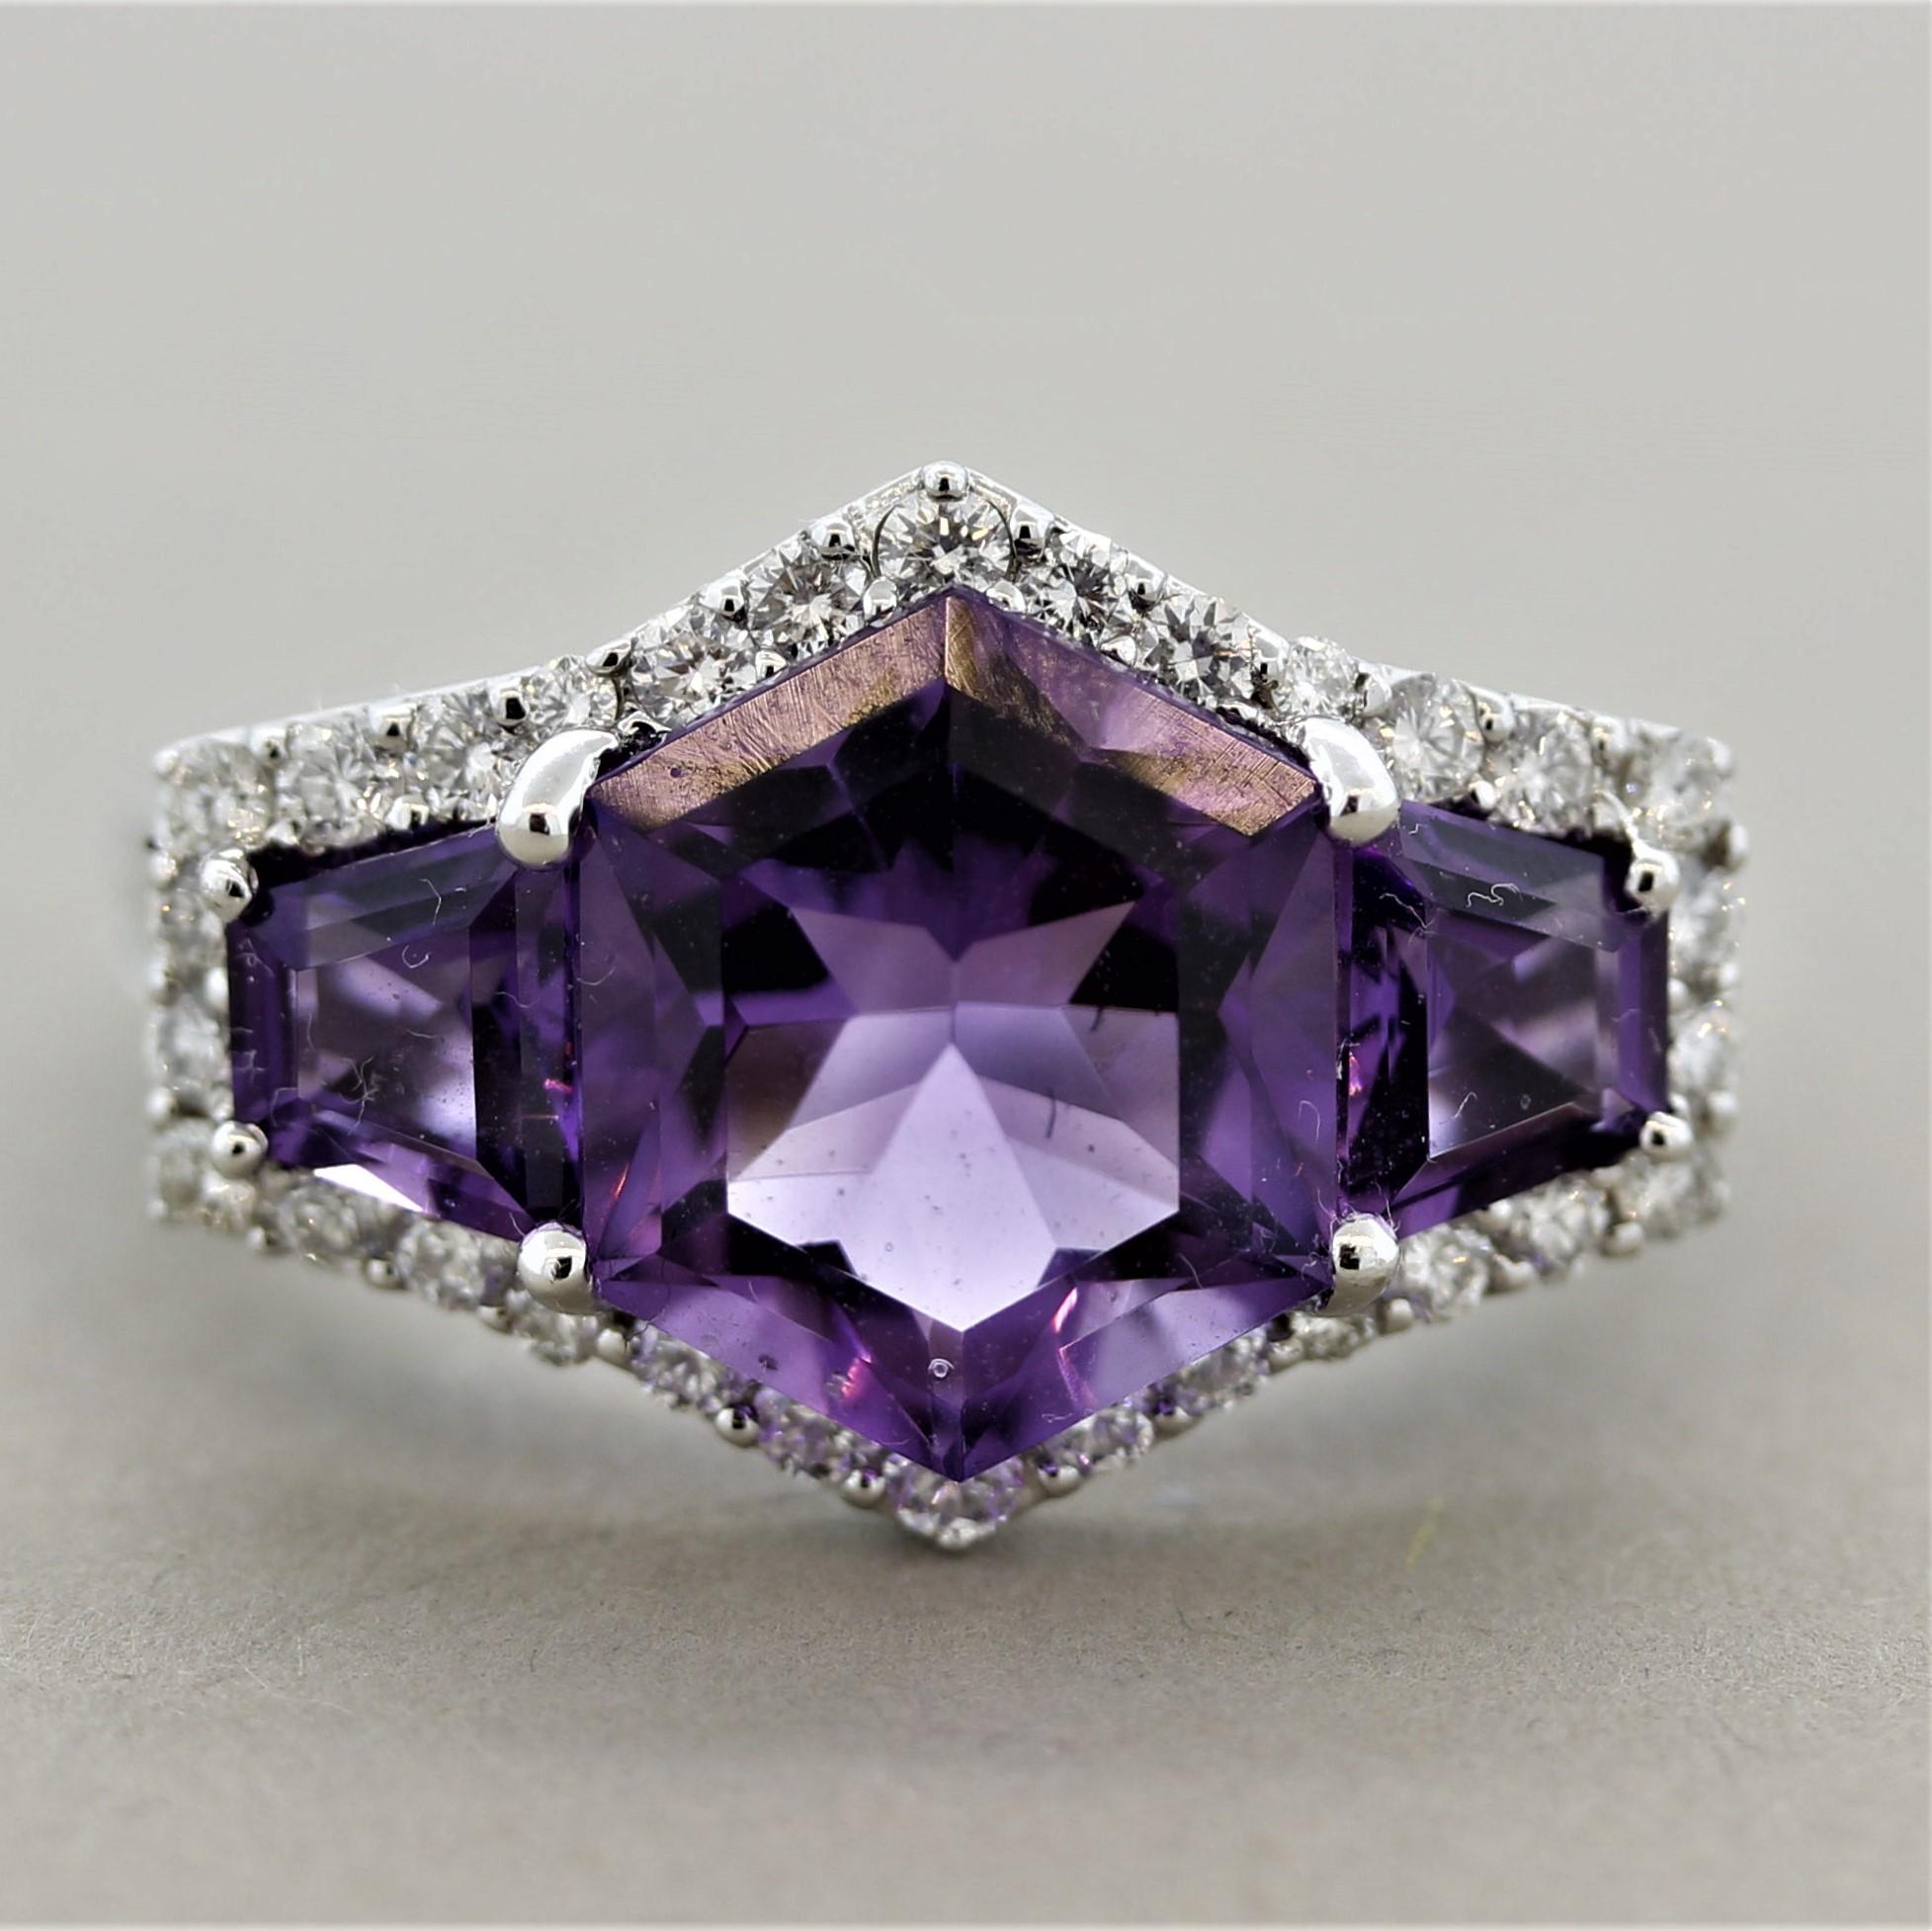 Wow! A special gem-set ring featuring 3 precision cut amethysts weighing 5.00 carats. They are perfectly matching in their vivid and bright purple color. The center amethyst is a hexagonal shape while the two side stones are shield cuts which